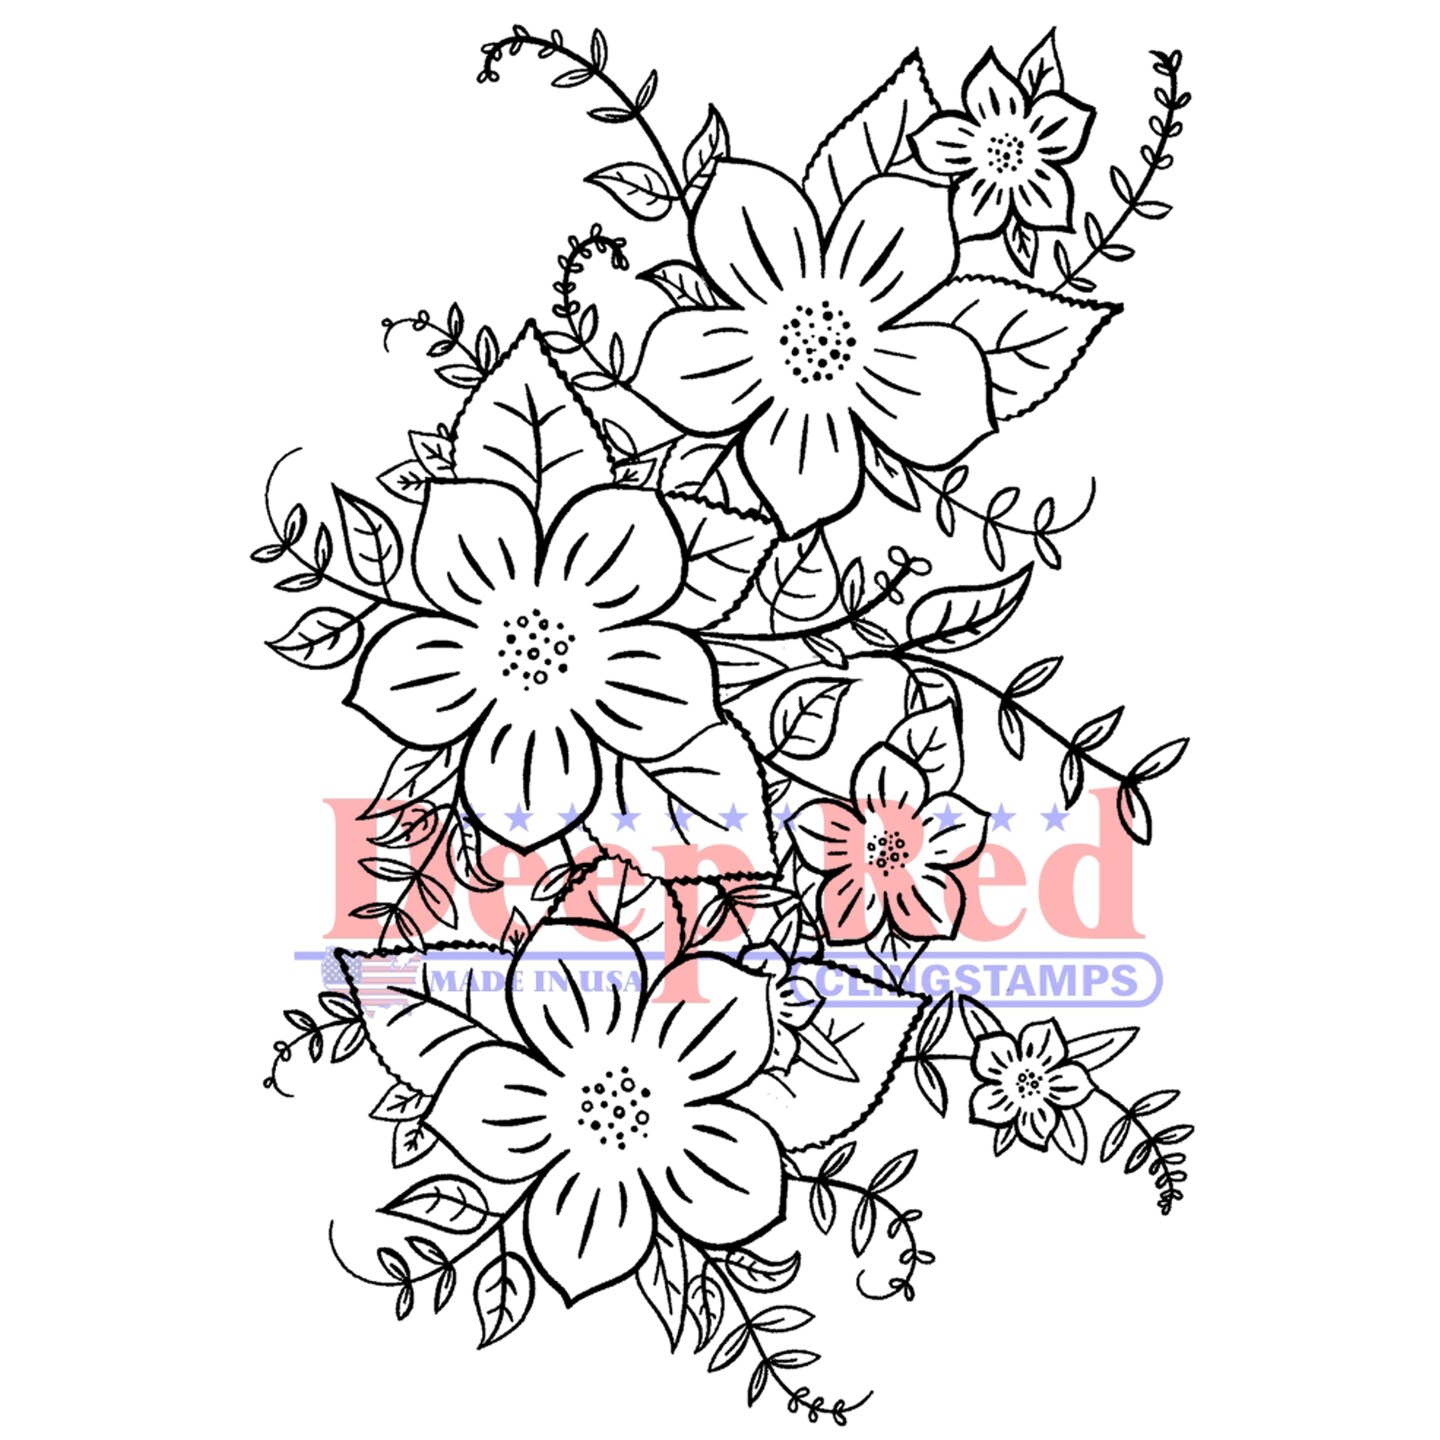 Deep Red Stamps Periwinkle Rubber Cling Stamp 2.2 x 3.2  inches